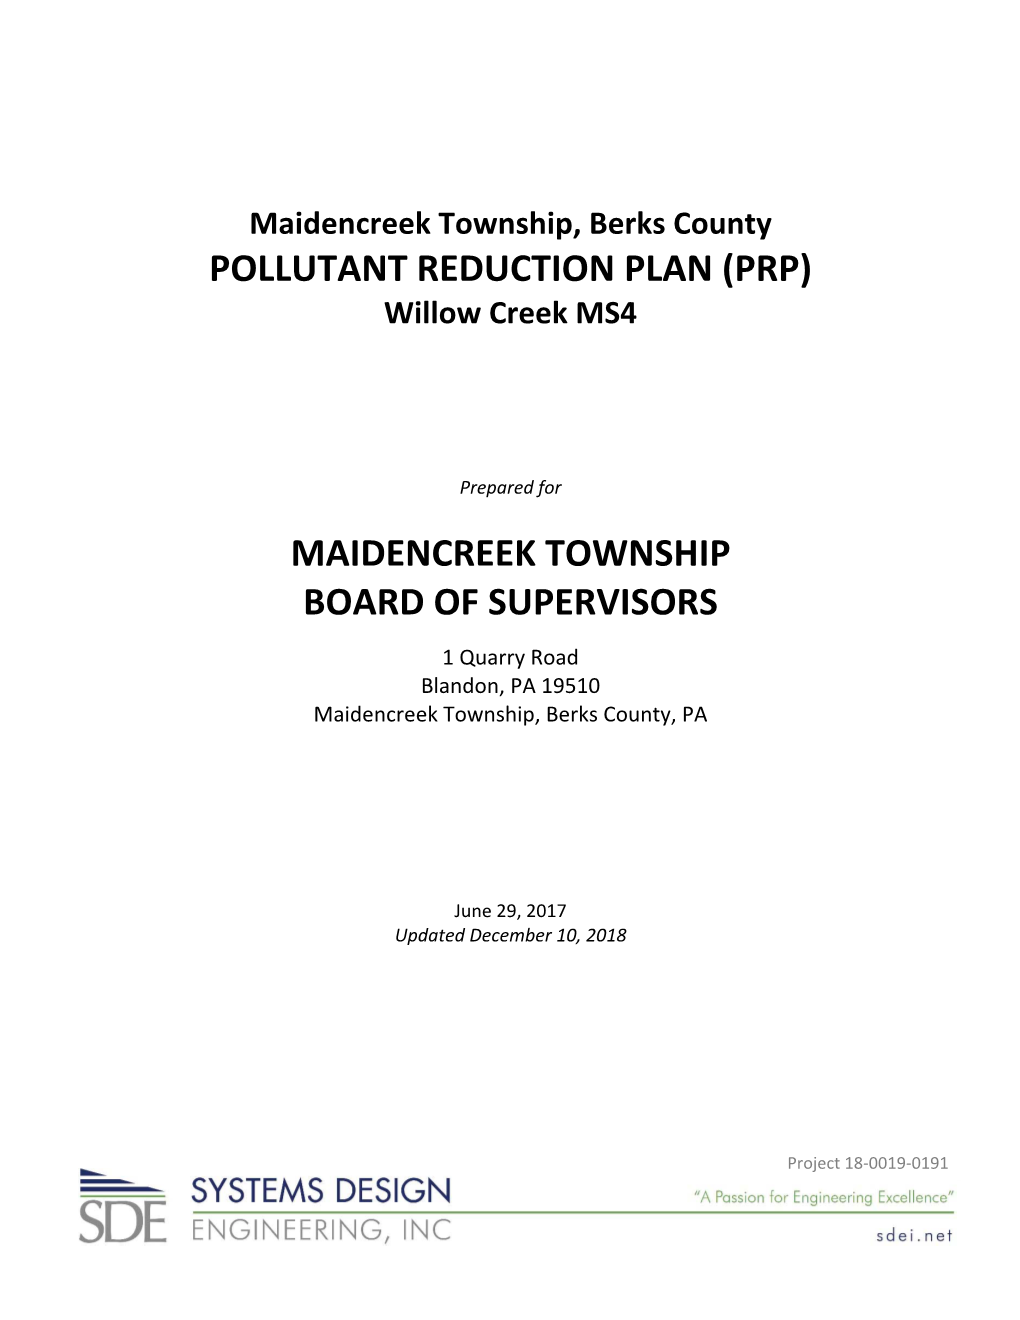 POLLUTANT REDUCTION PLAN (PRP) Willow Creek MS4